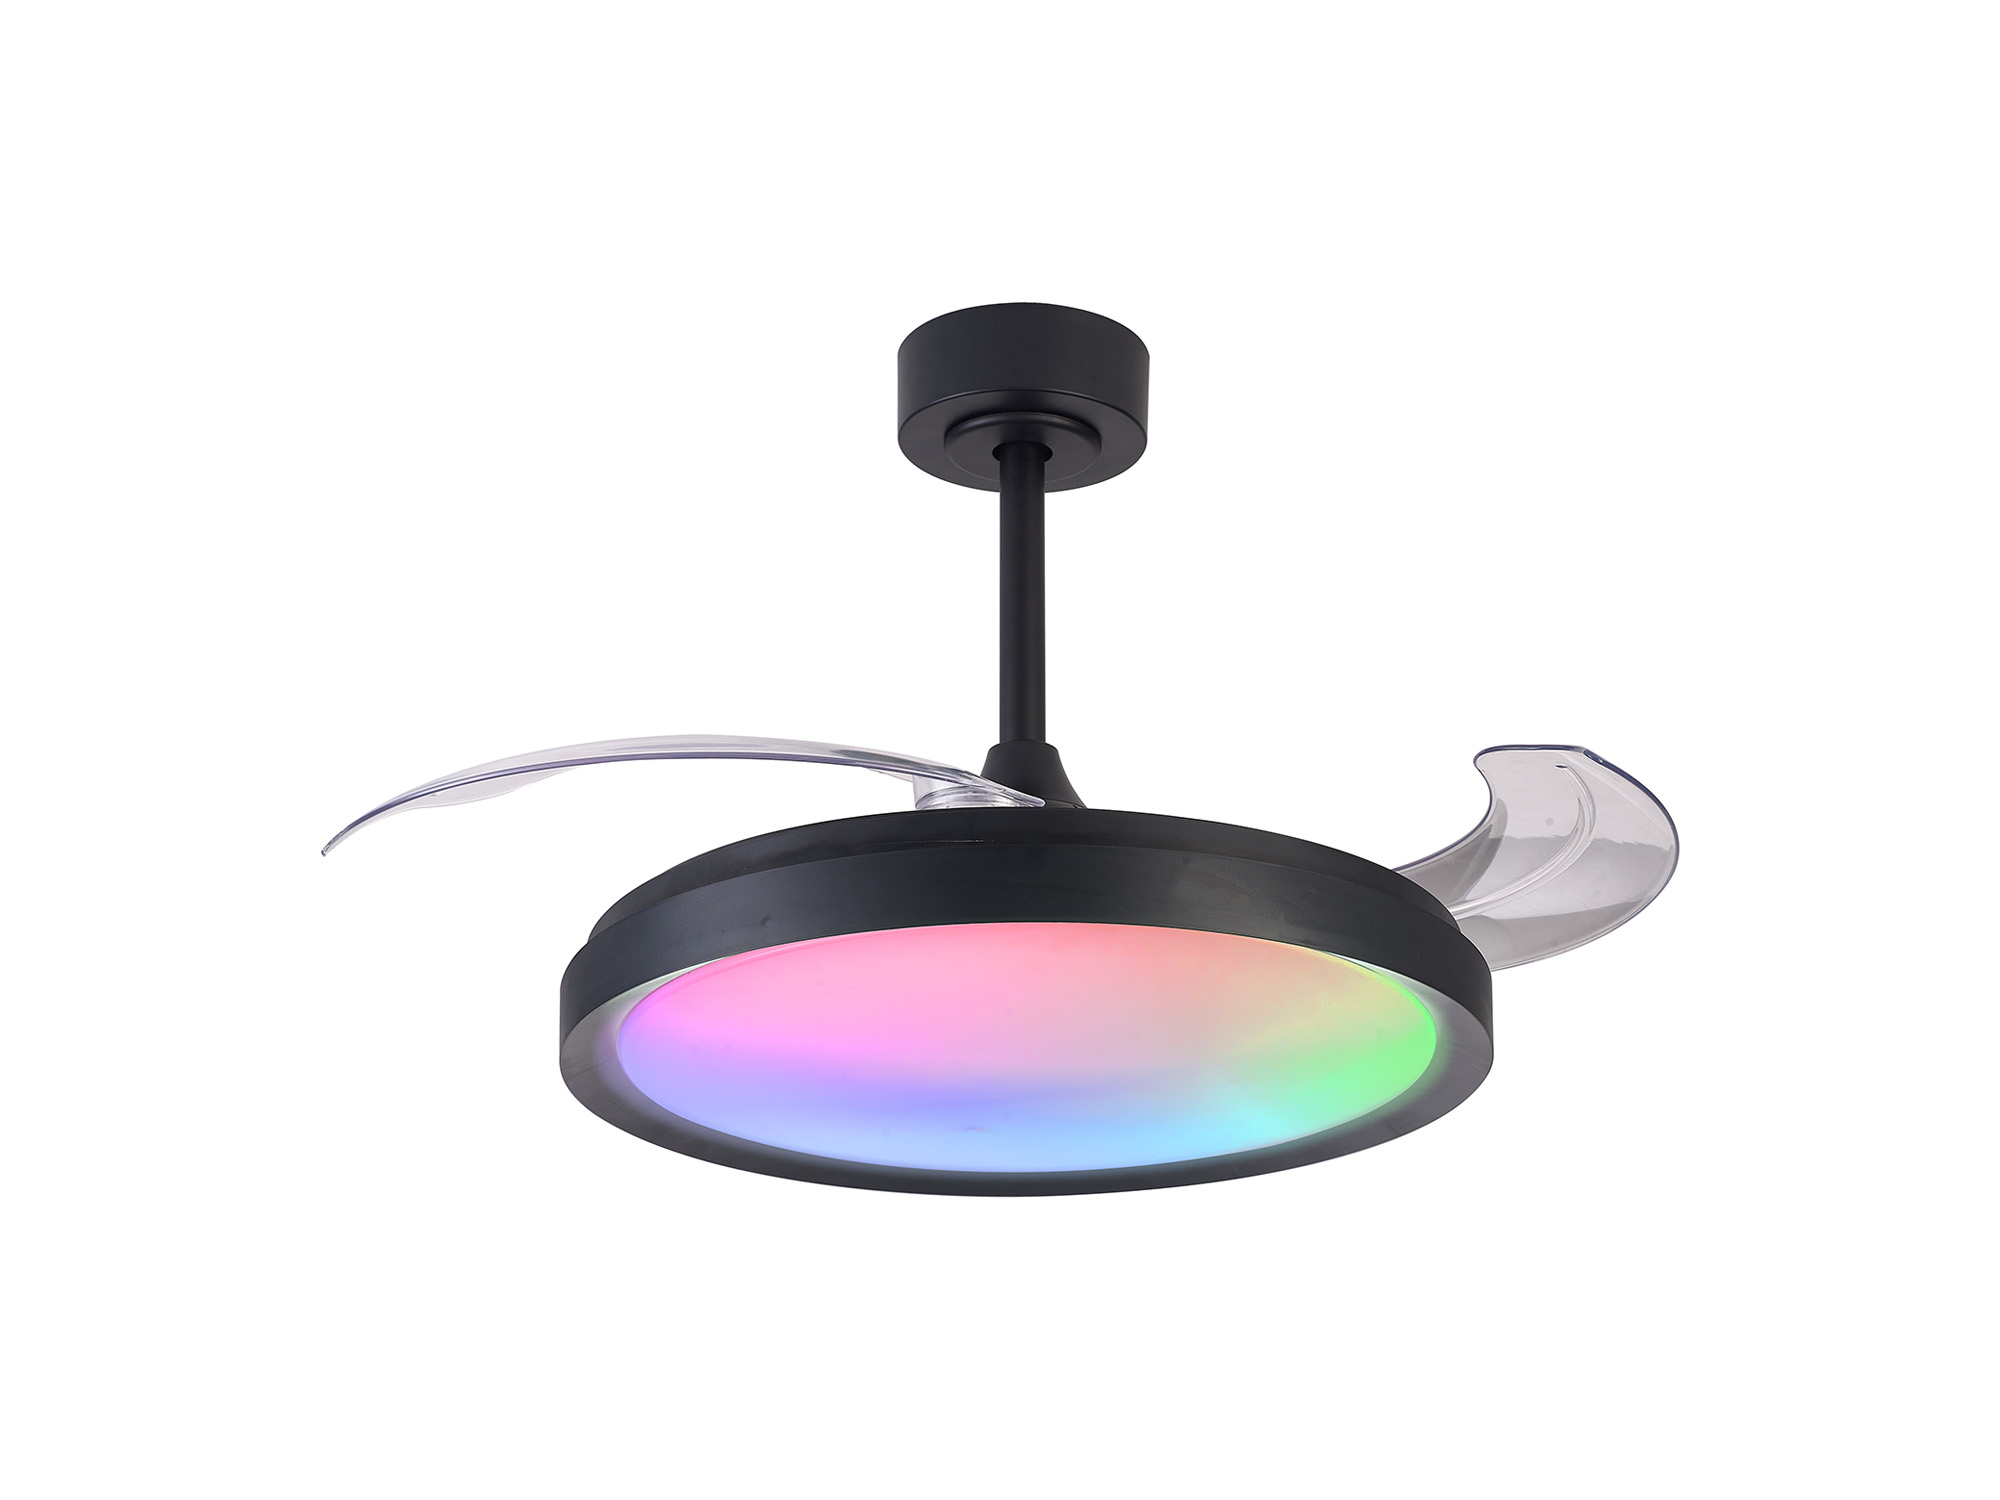 M8759  Siberia 50W LED Dimmable White/RGB Ceiling Light With Built-In 30W DC Fan, 3000-6500K Remote Control, Black